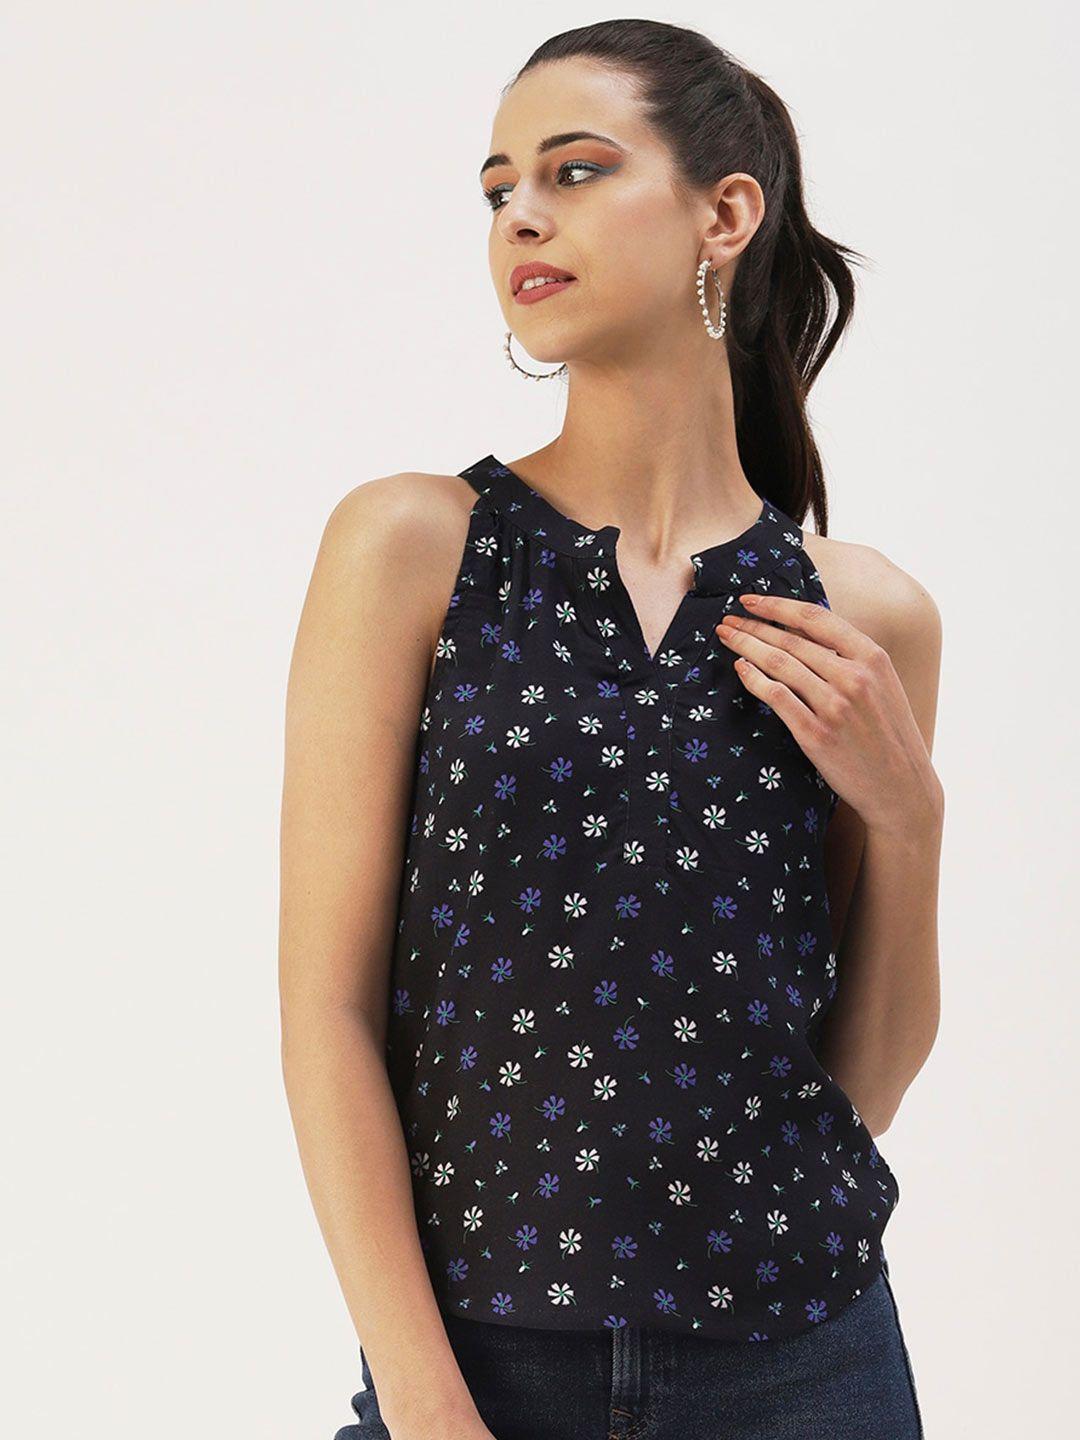 dressberry  floral printed sleeveless top